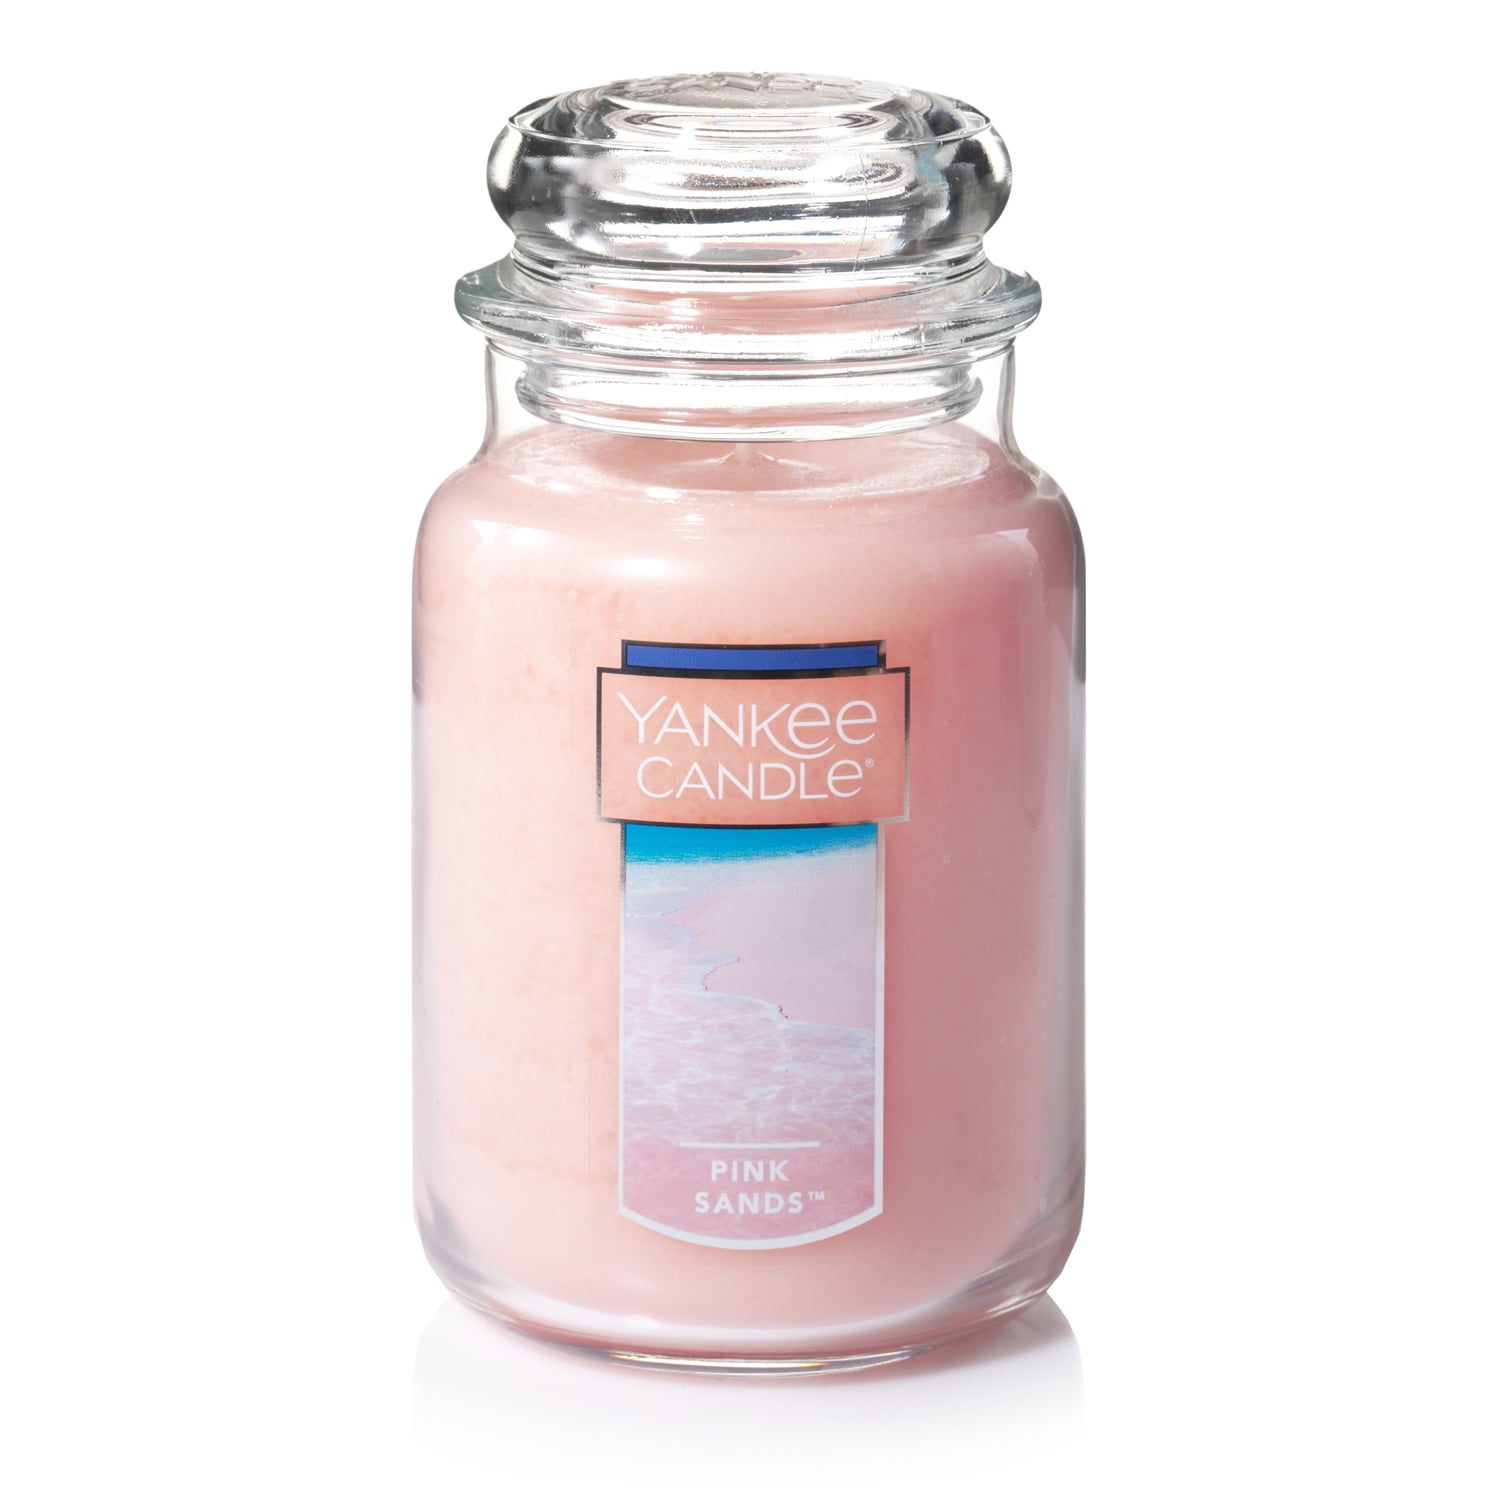 Yankee Candle Accents | Yankee Candle Cotton Candy Candle | Color: Pink/White | Size: 22 oz. | Kristen4074's Closet